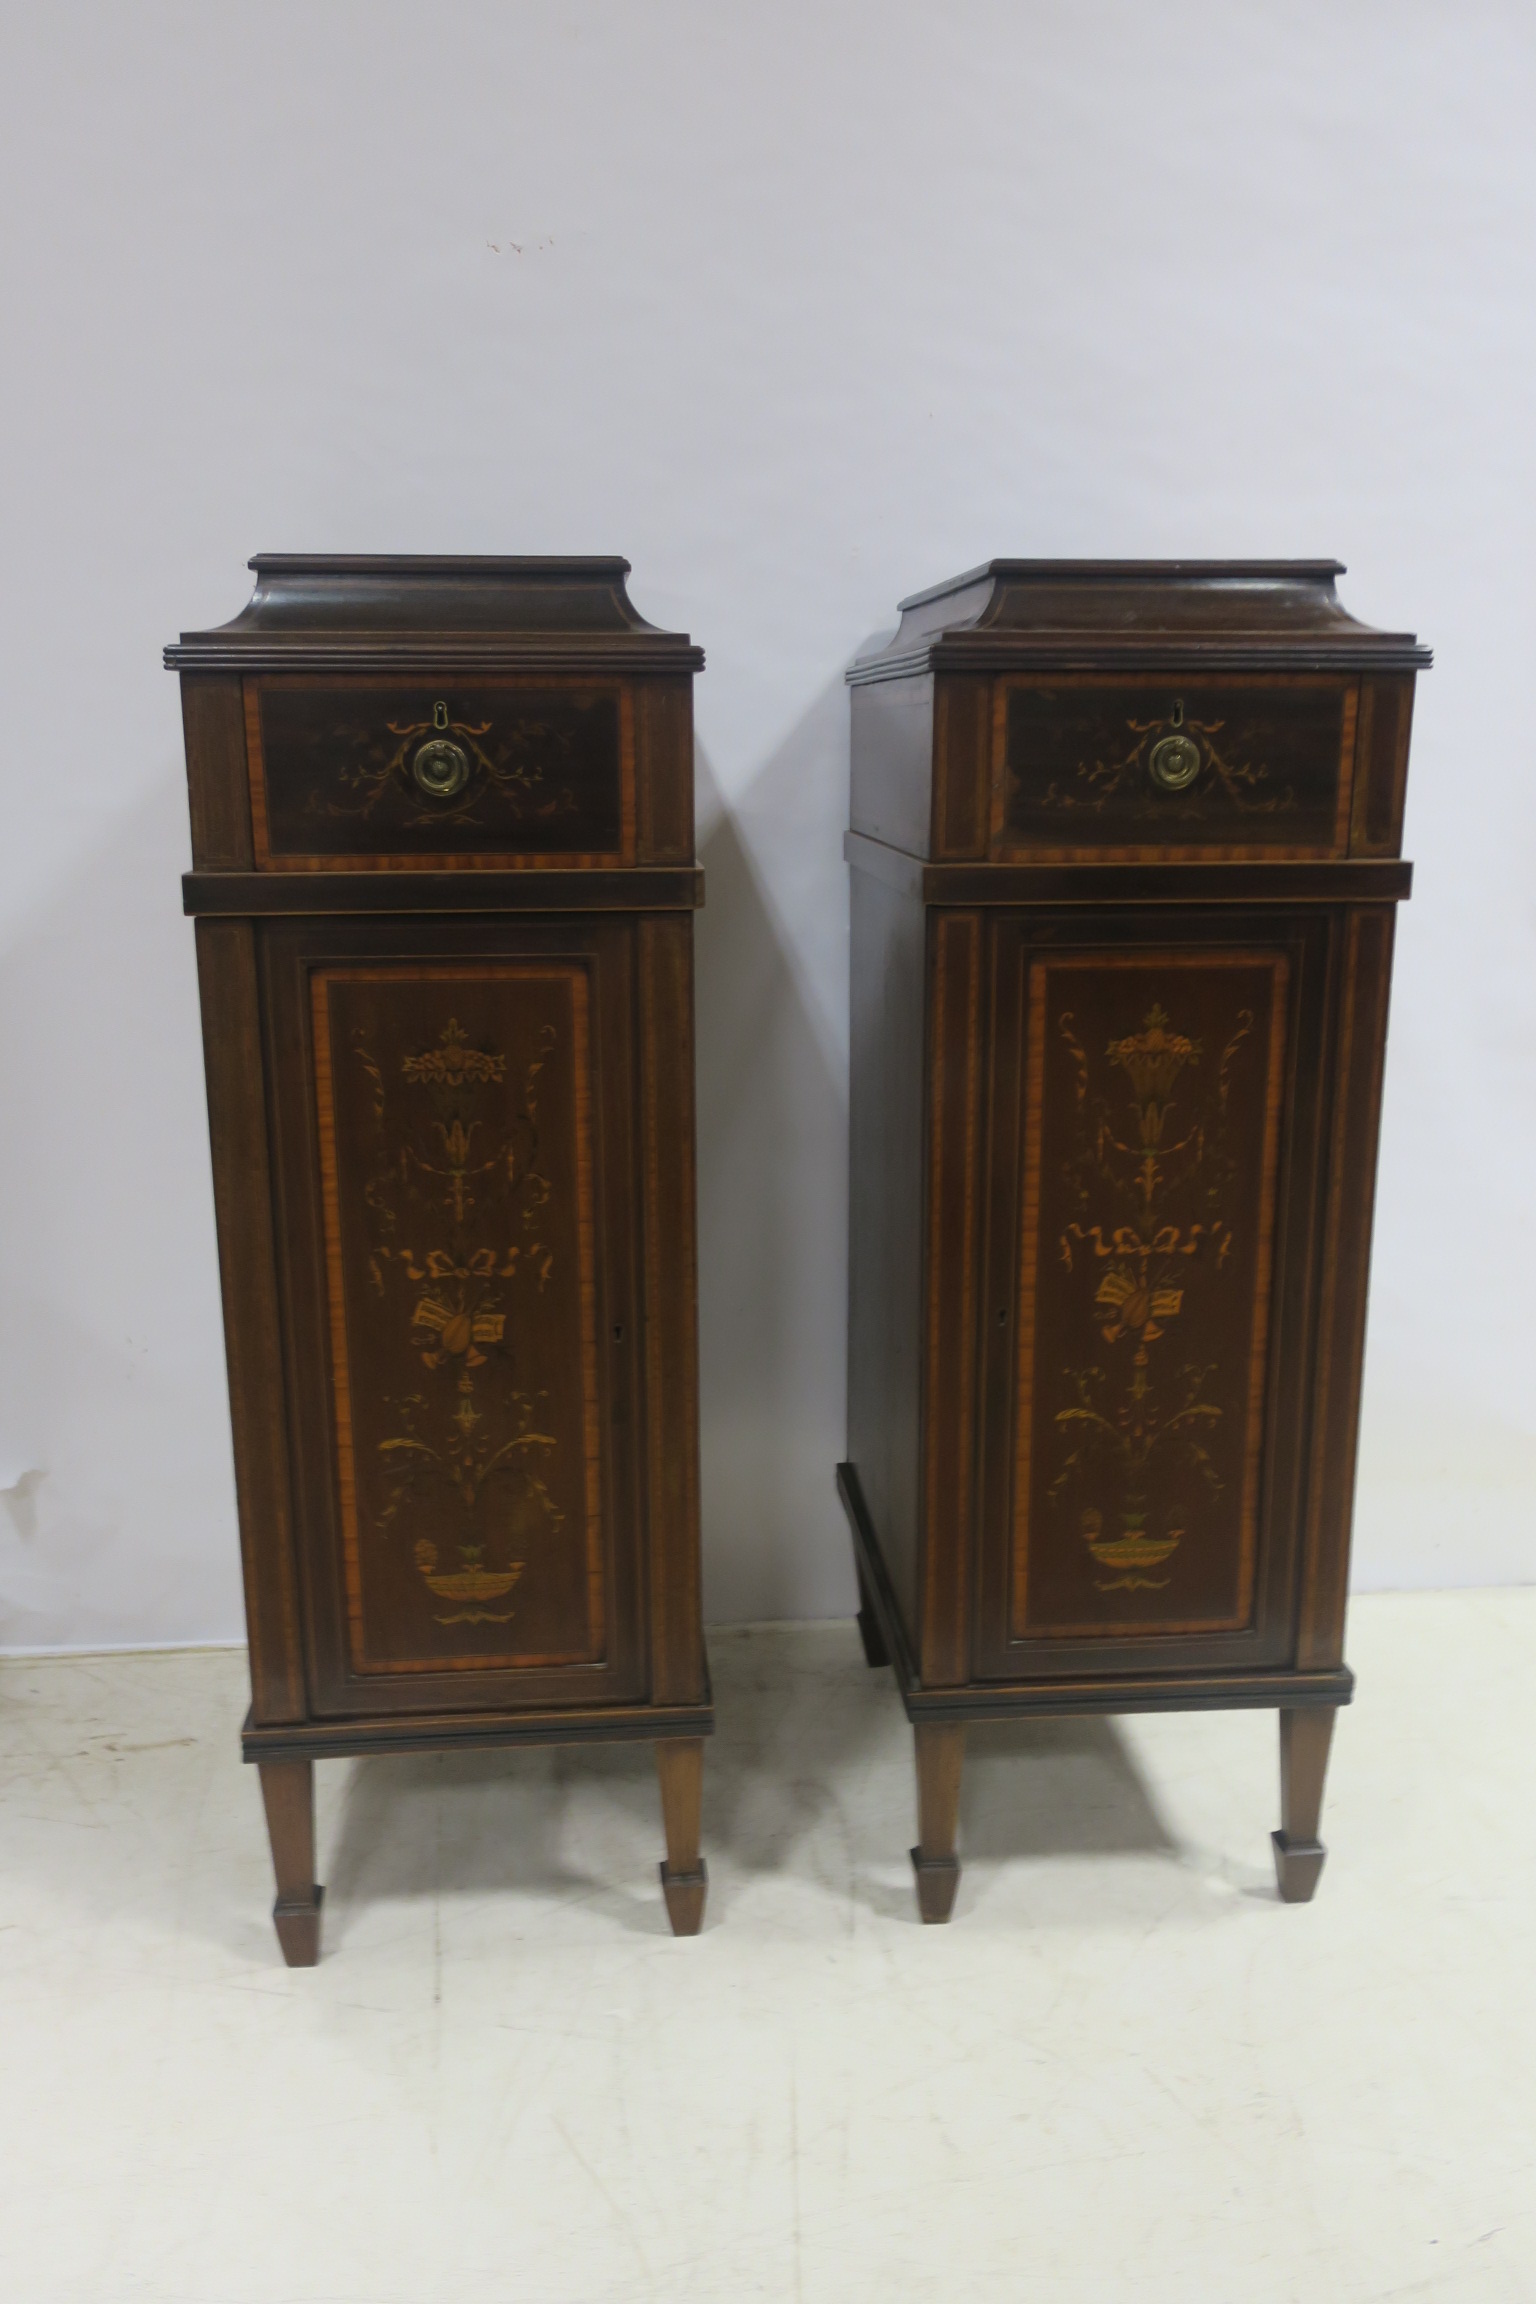 A VERY FINE PAIR OF 19th CENTURY MAHOGANY AND SATINWOOD CROSS BANDED DINING ROOM PEDESTALS,